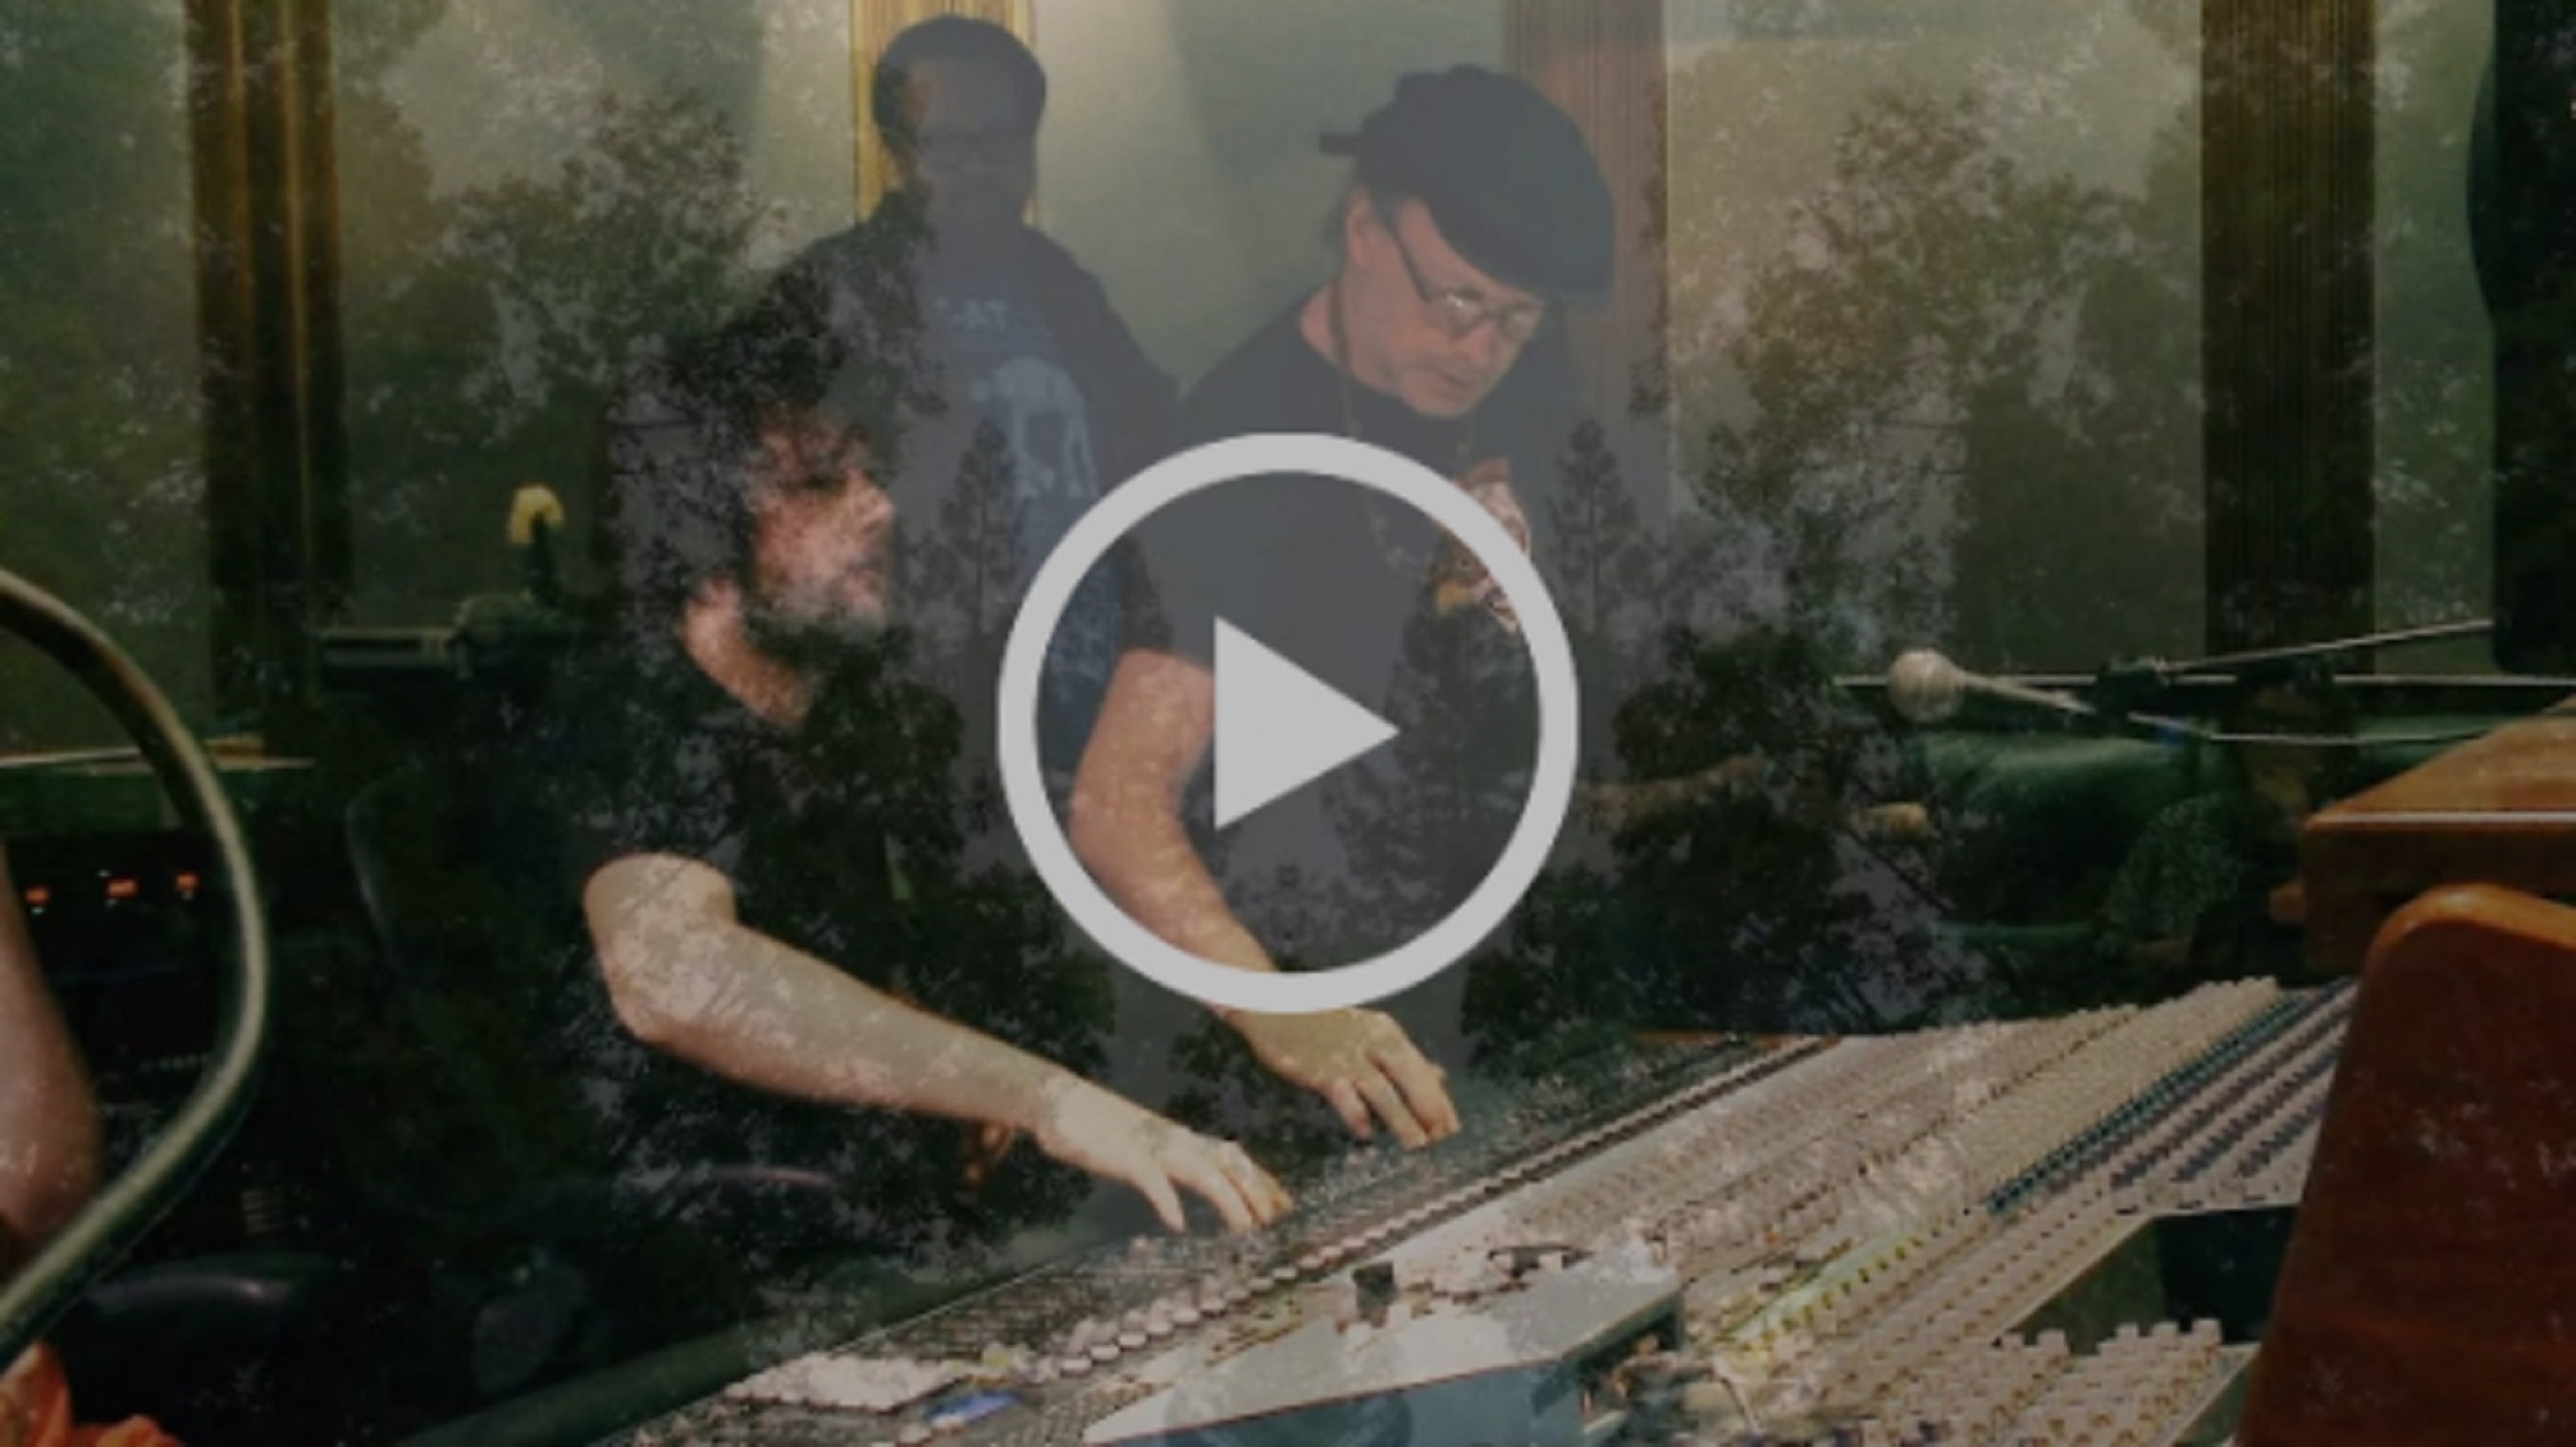 Watch a New KIMOCK Video, "Variation"